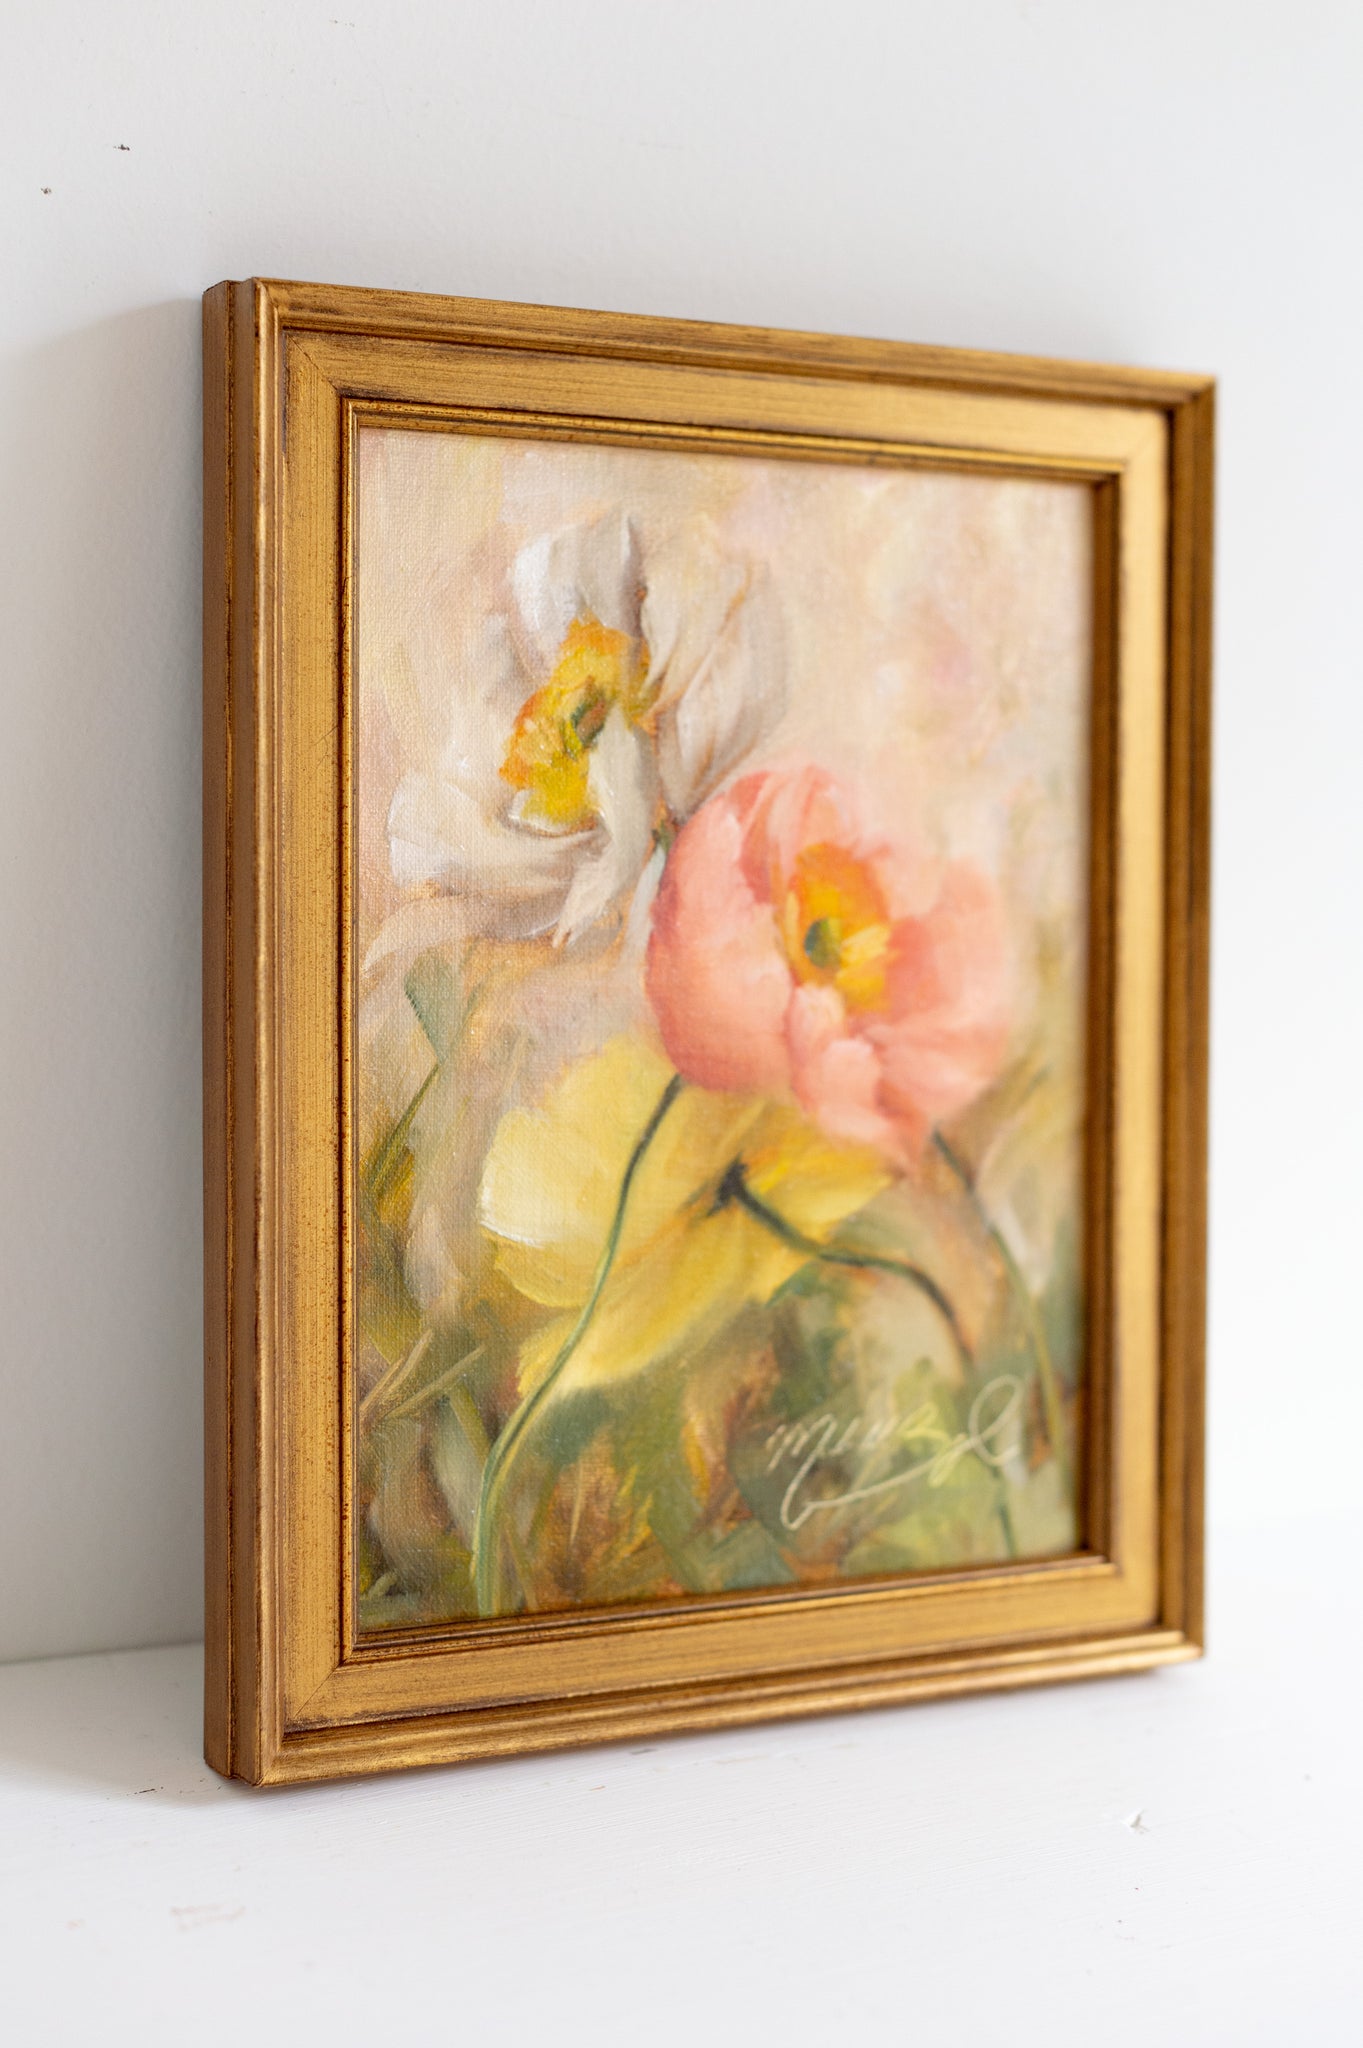 Beauty of the Wild - 6x8" Framed Oil Painting